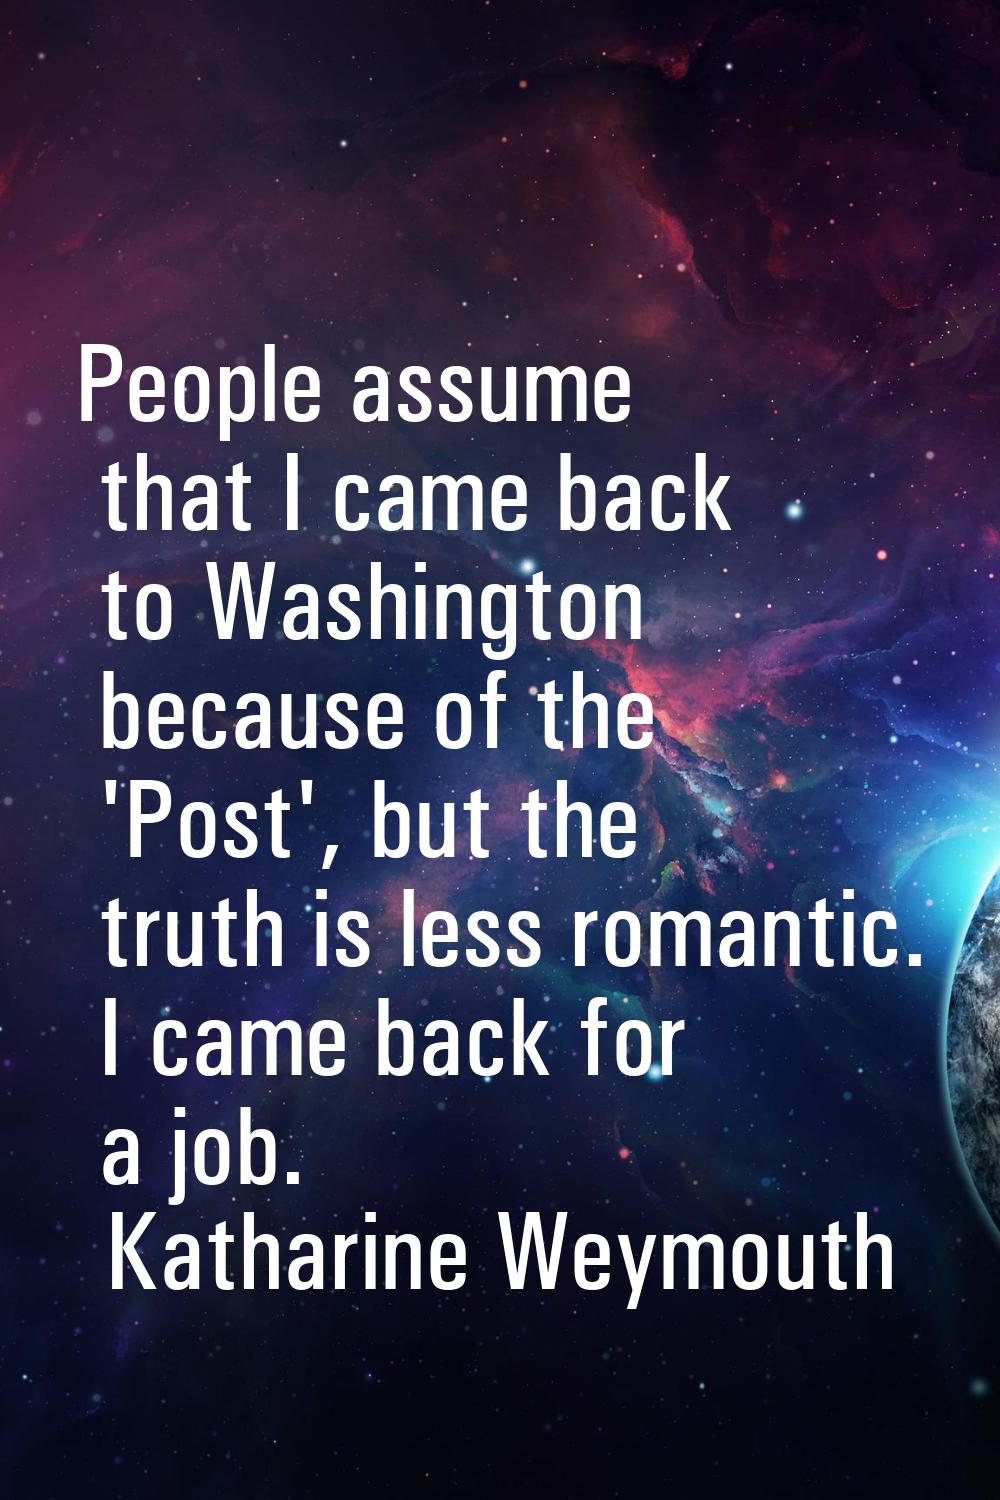 People assume that I came back to Washington because of the 'Post', but the truth is less romantic.